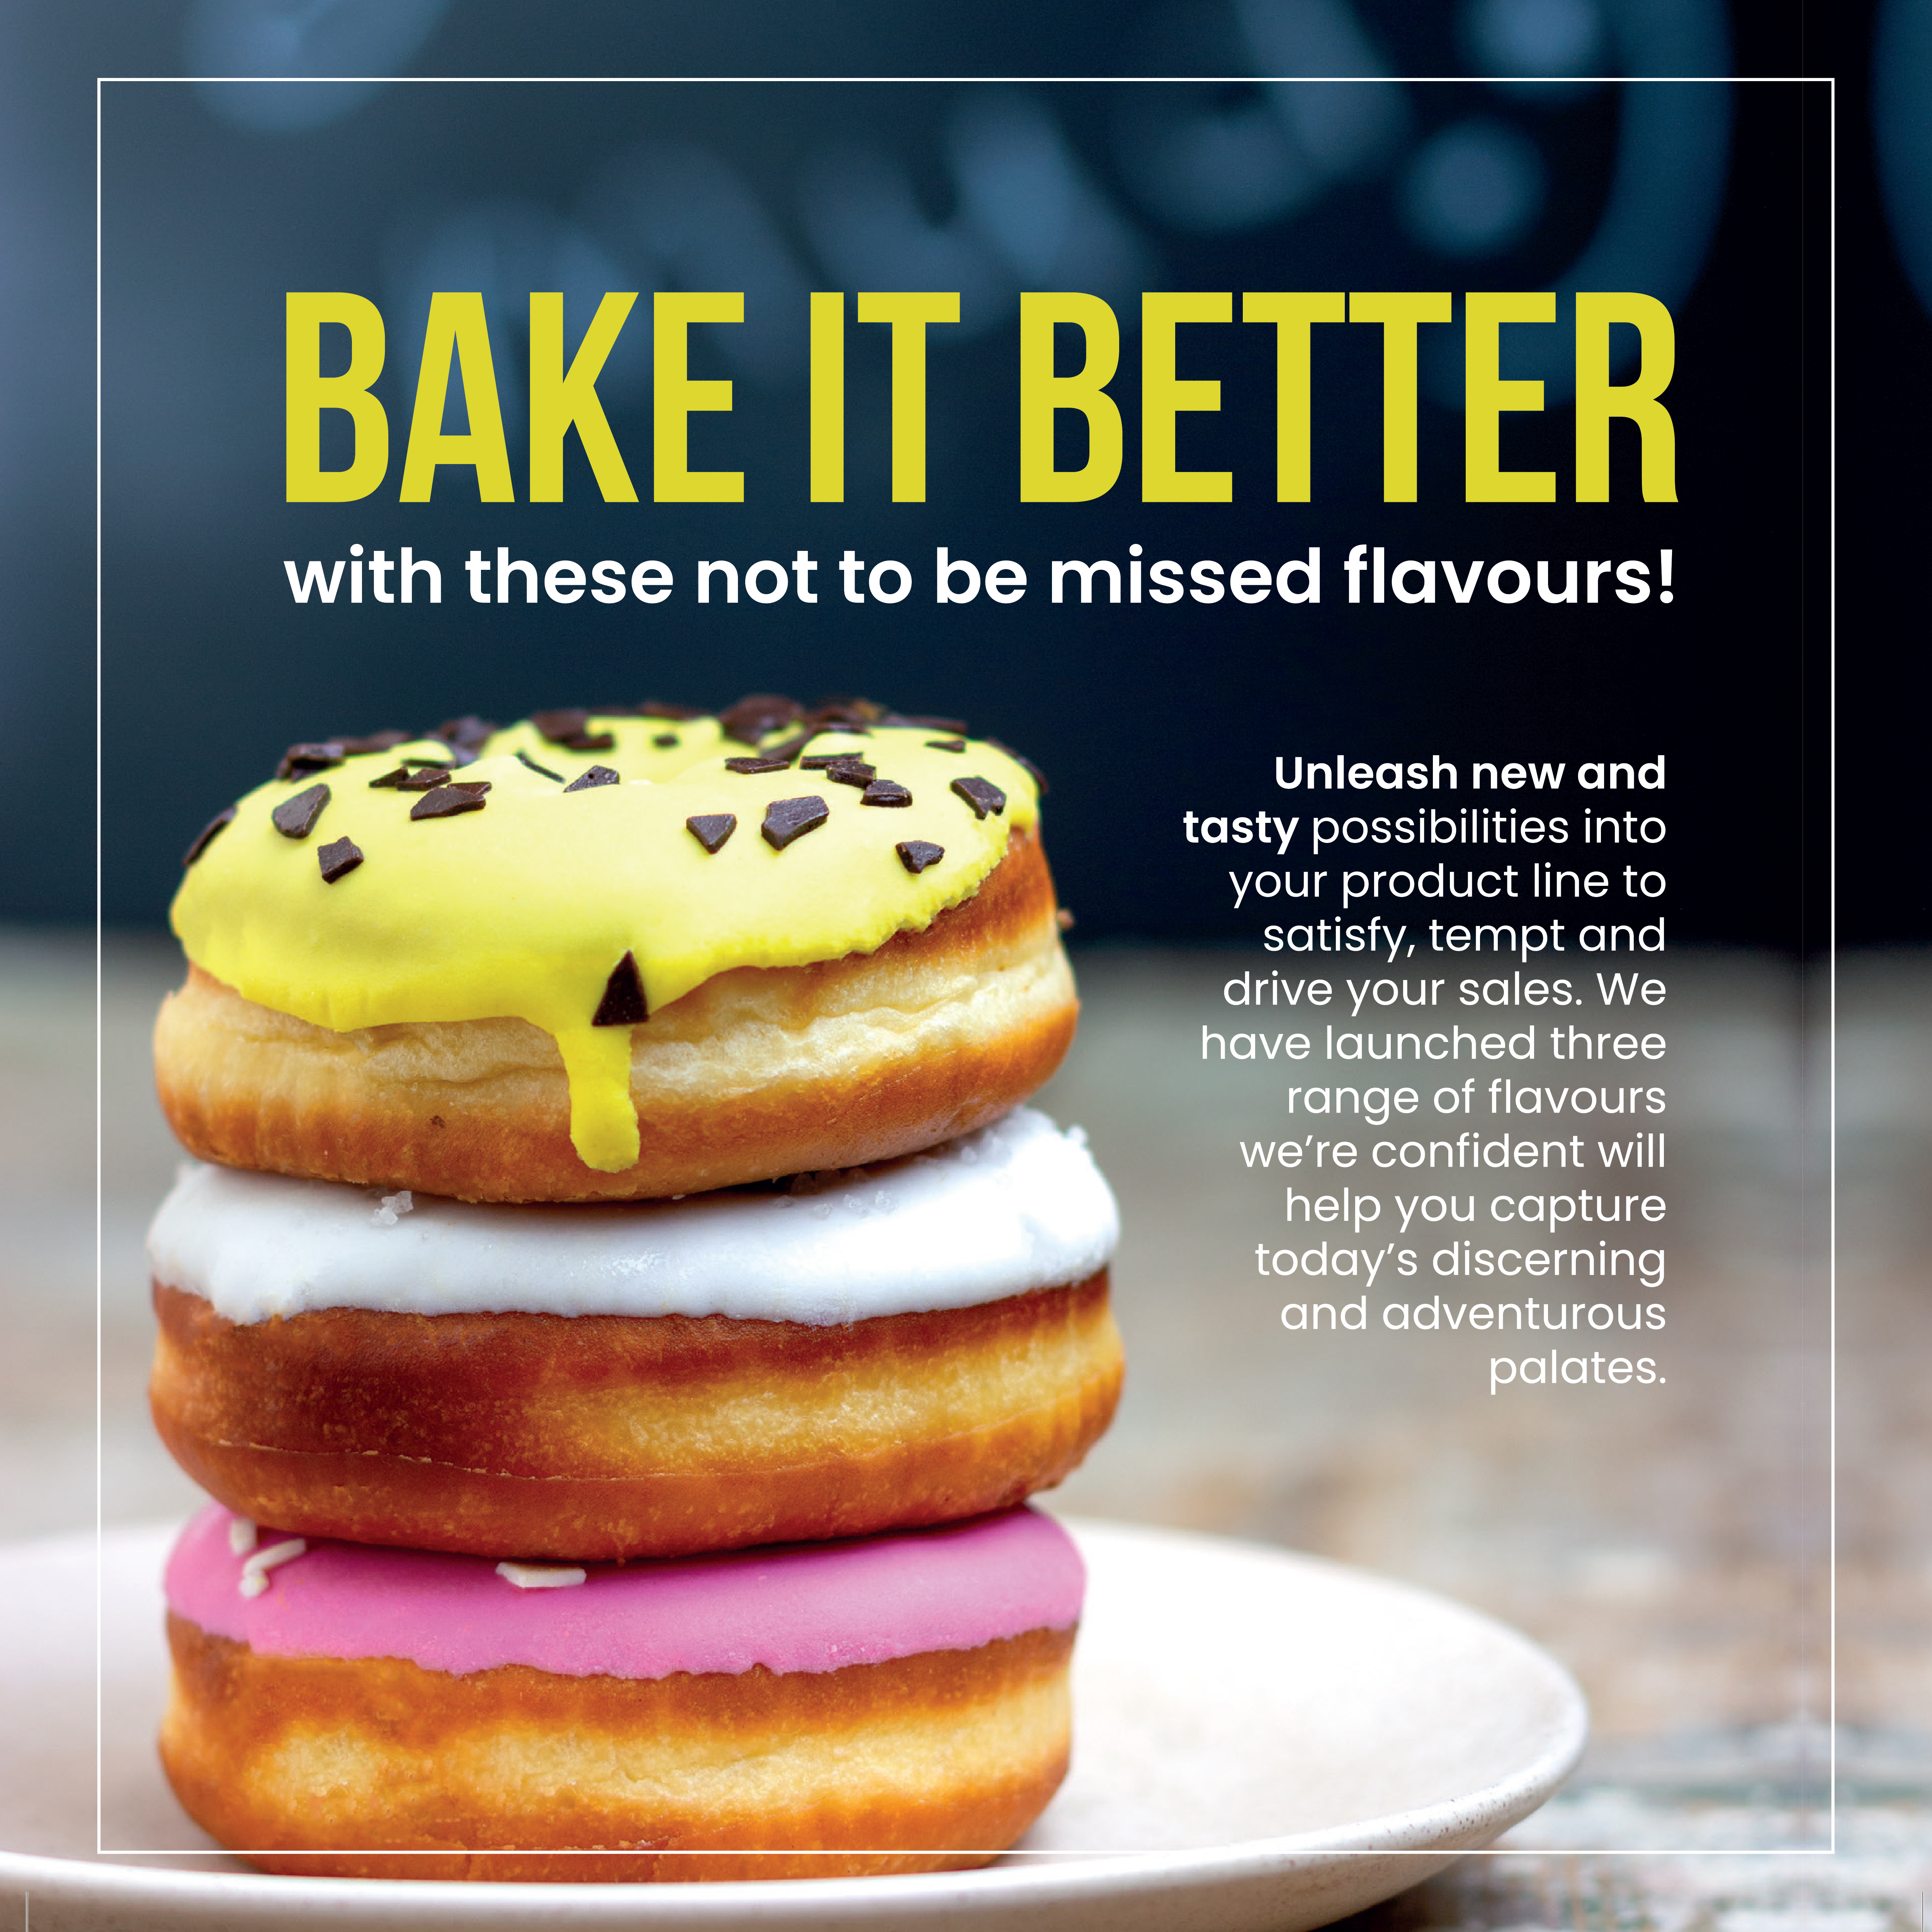 Bake It Better | Sweet Bakery Flavours for Fillings, Toppings and In-dough applications